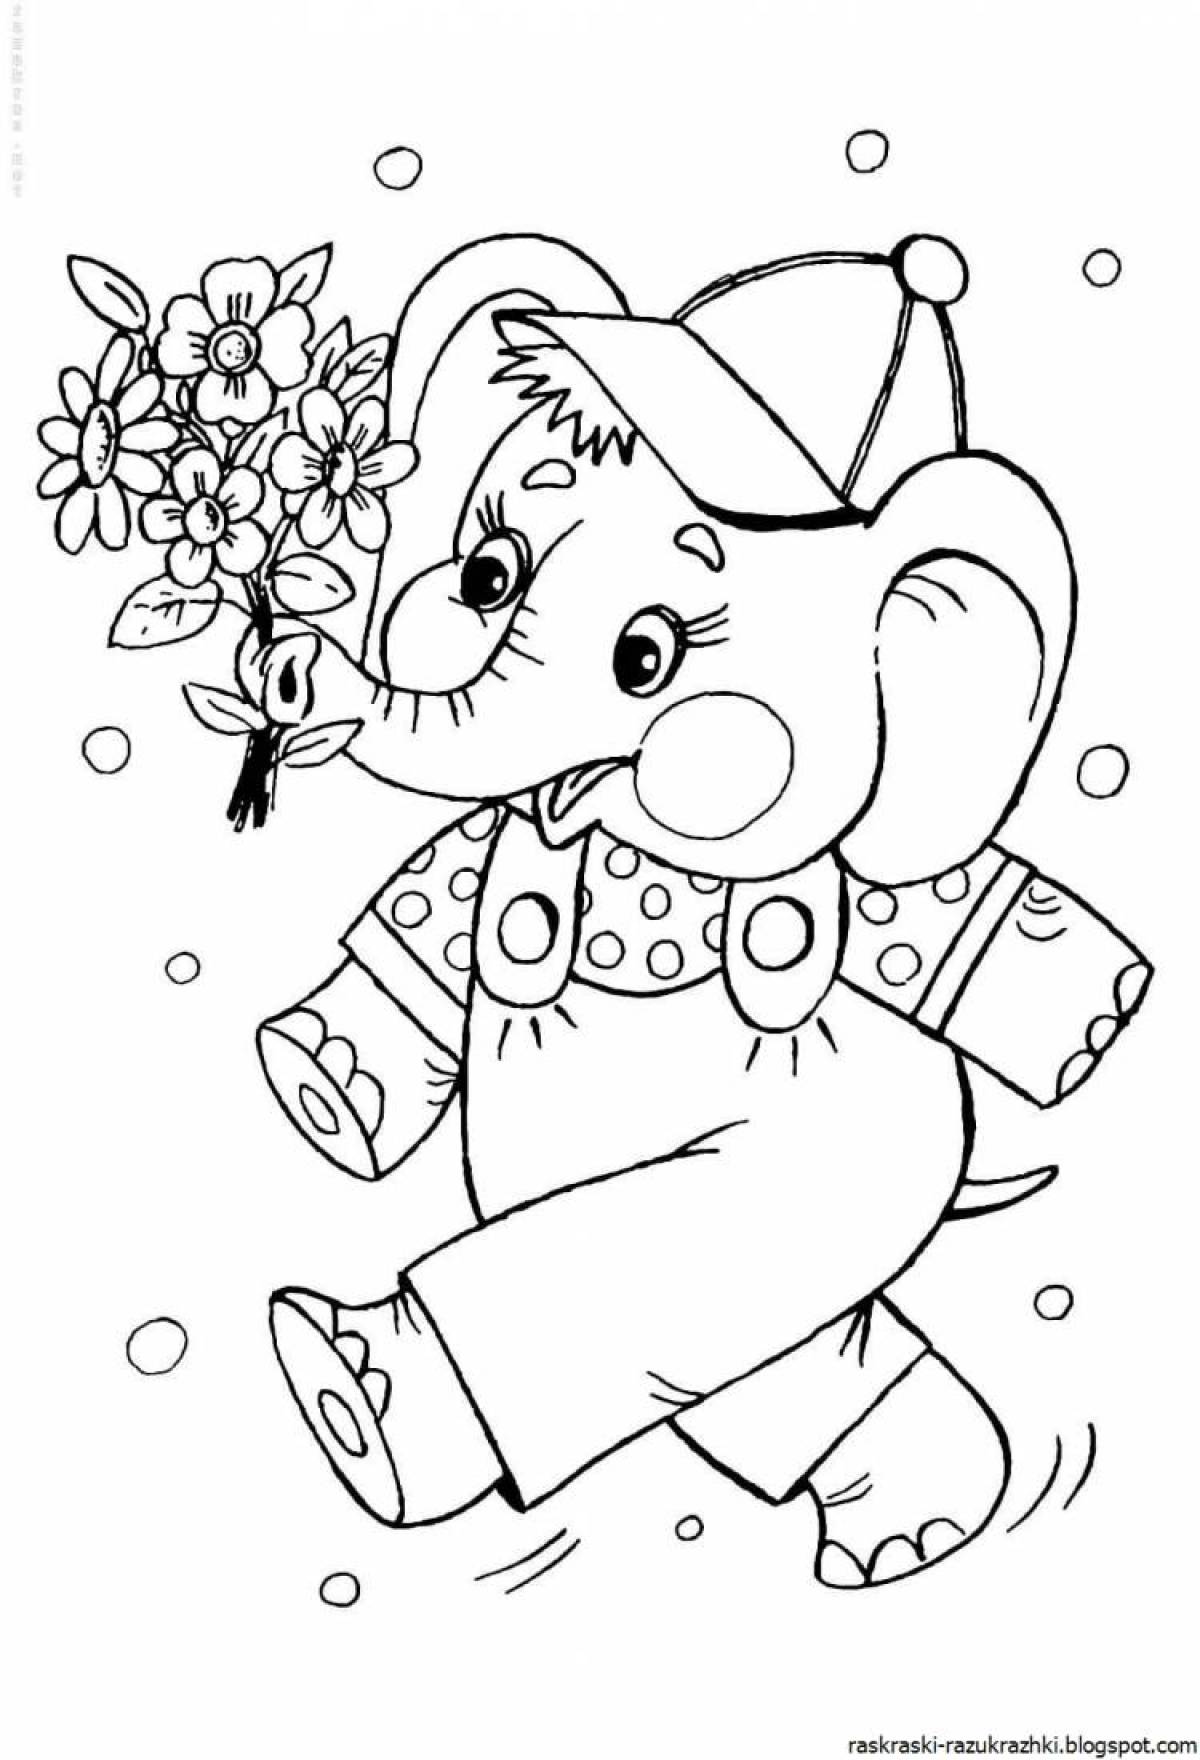 Innovative coloring page 6 years old